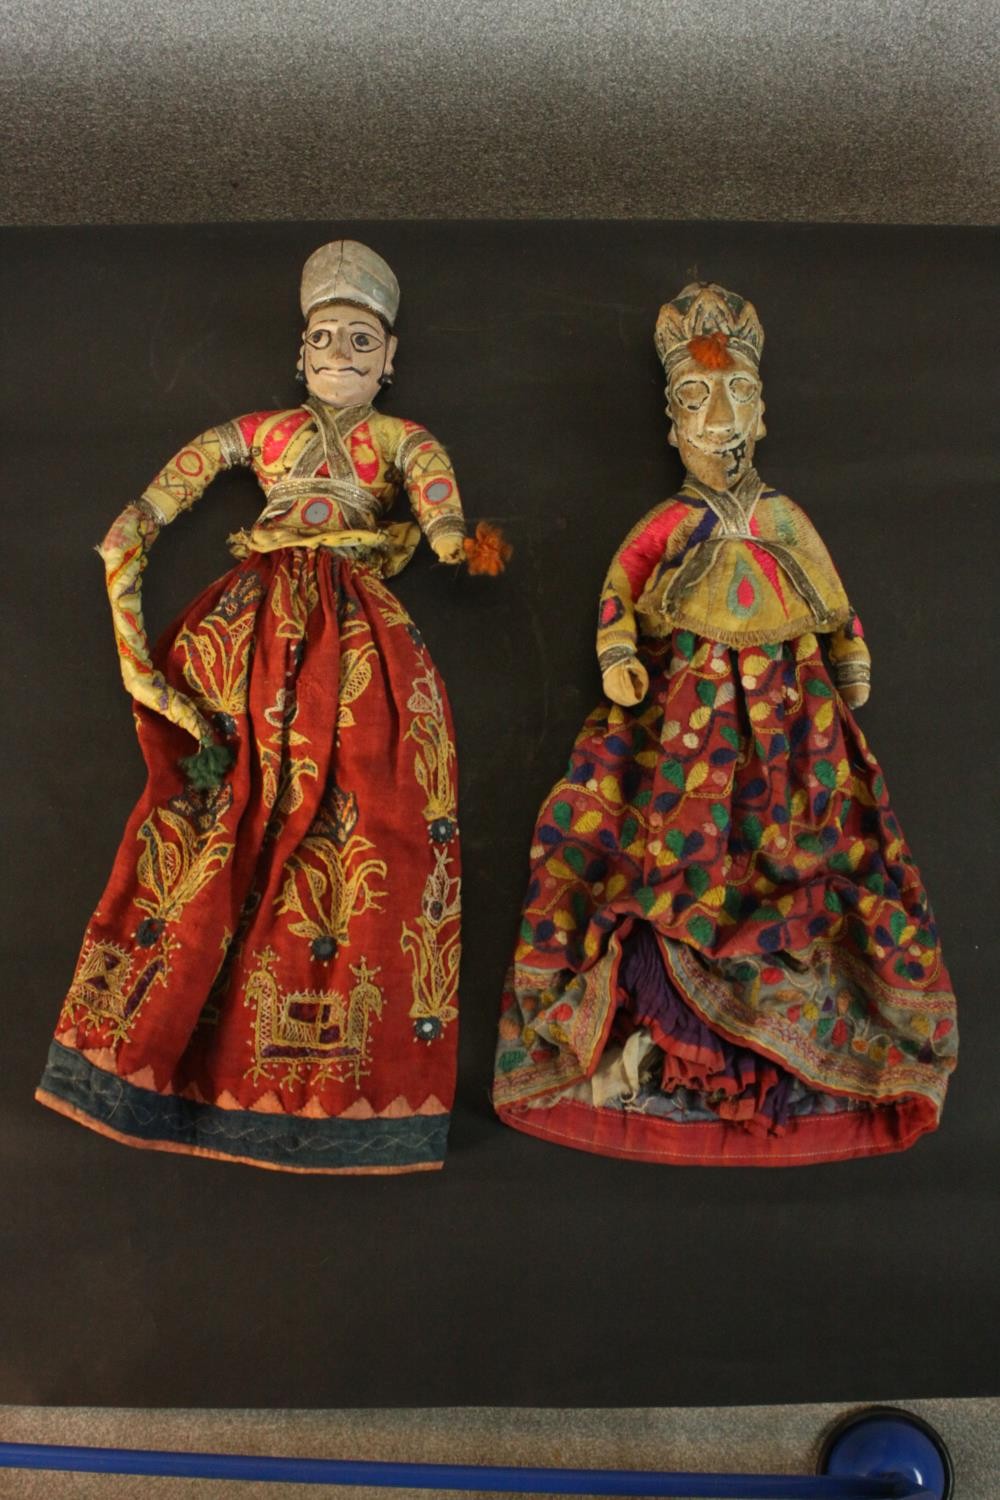 Two 19th century carved and painted Indian dolls in embroidered traditional costumes, the robes with